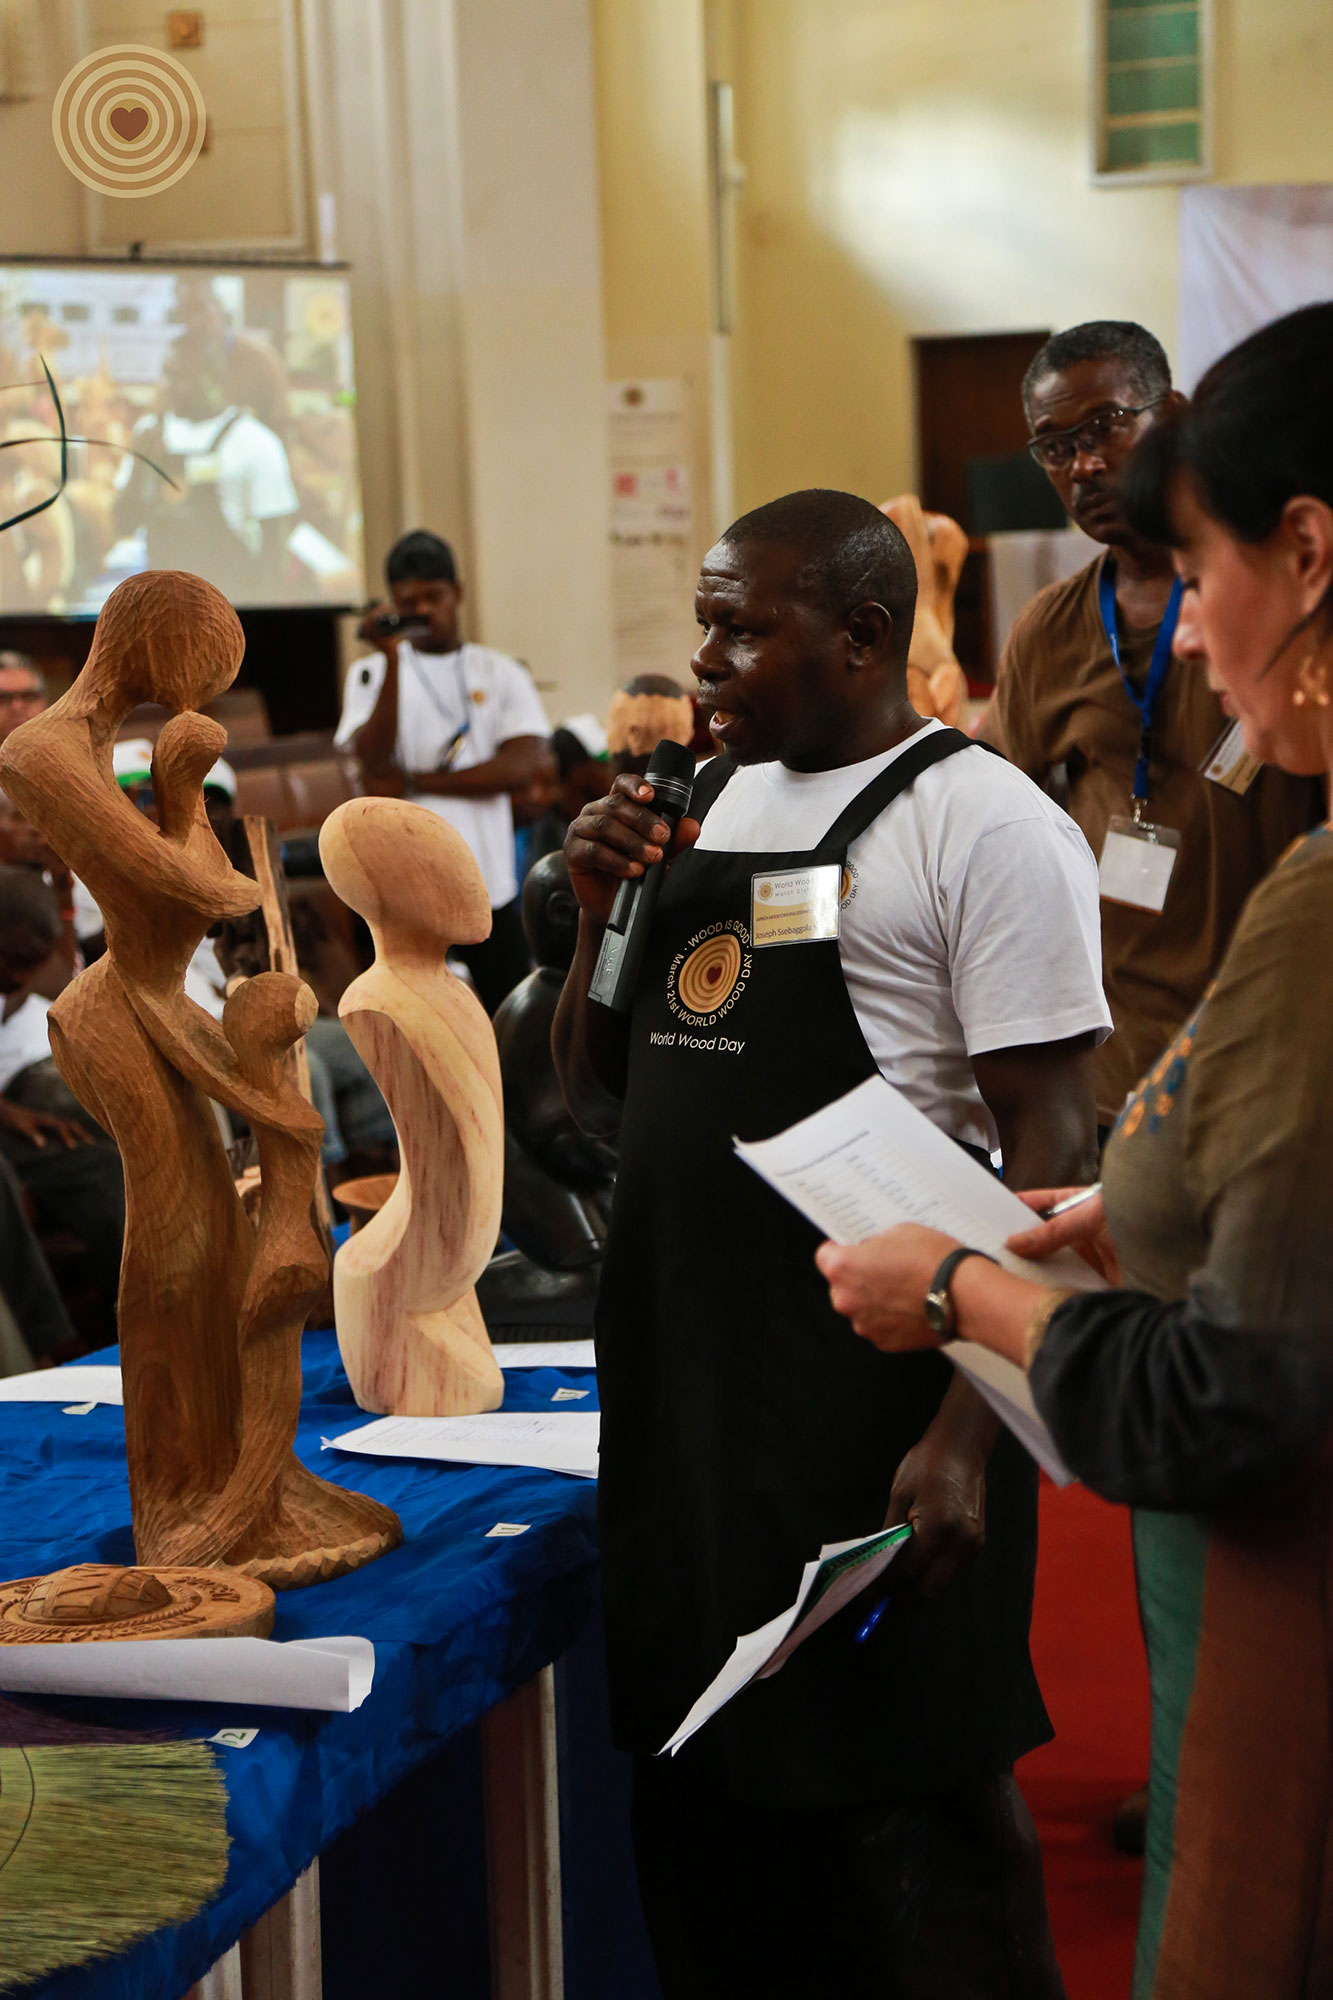 2013 World Wood Day, International Woodcarving Show